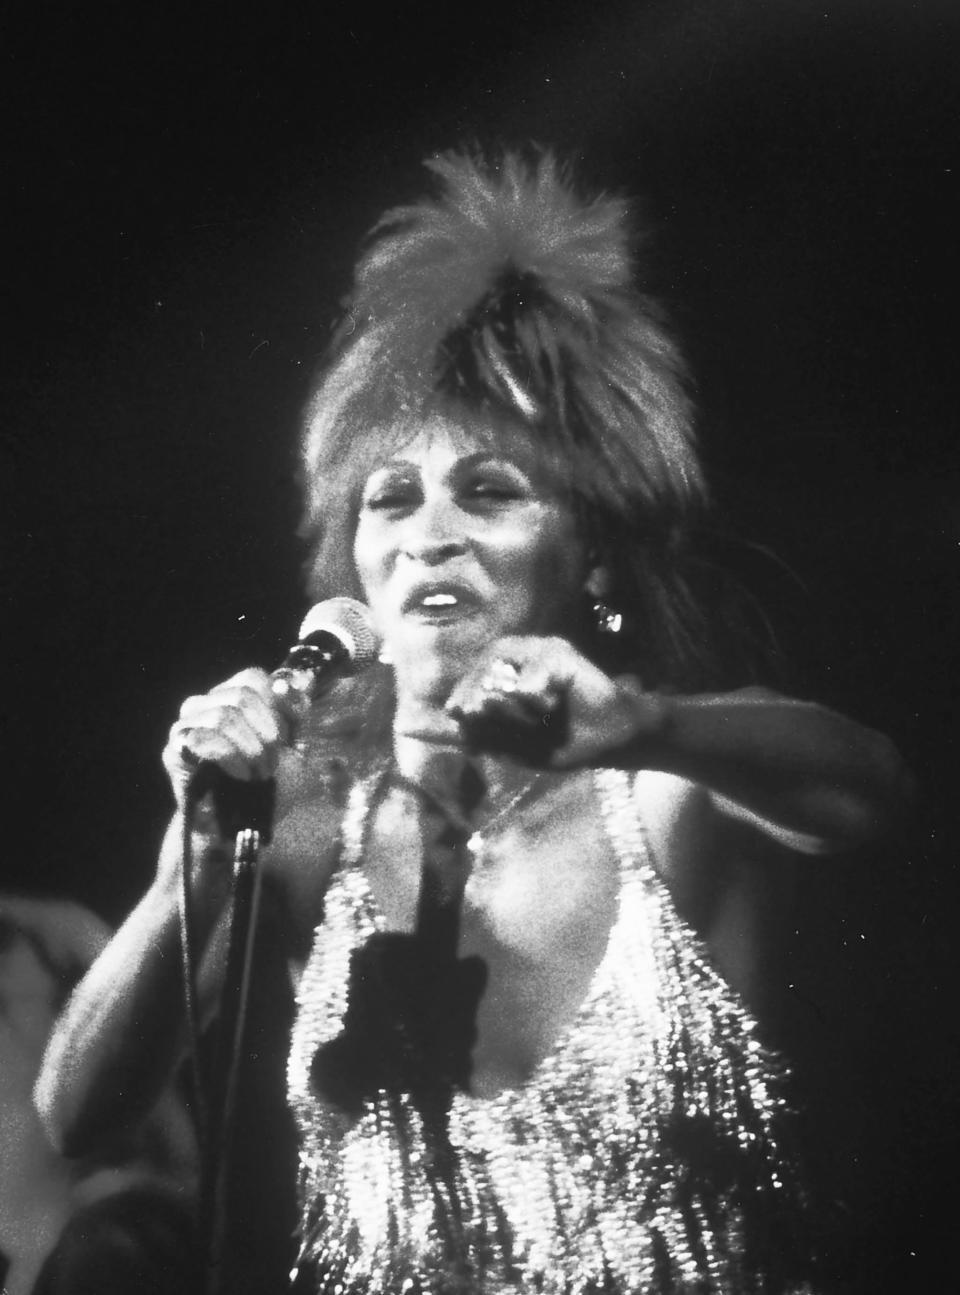 This photo of Tina Turner was taken during her 1982 performance in Topeka.